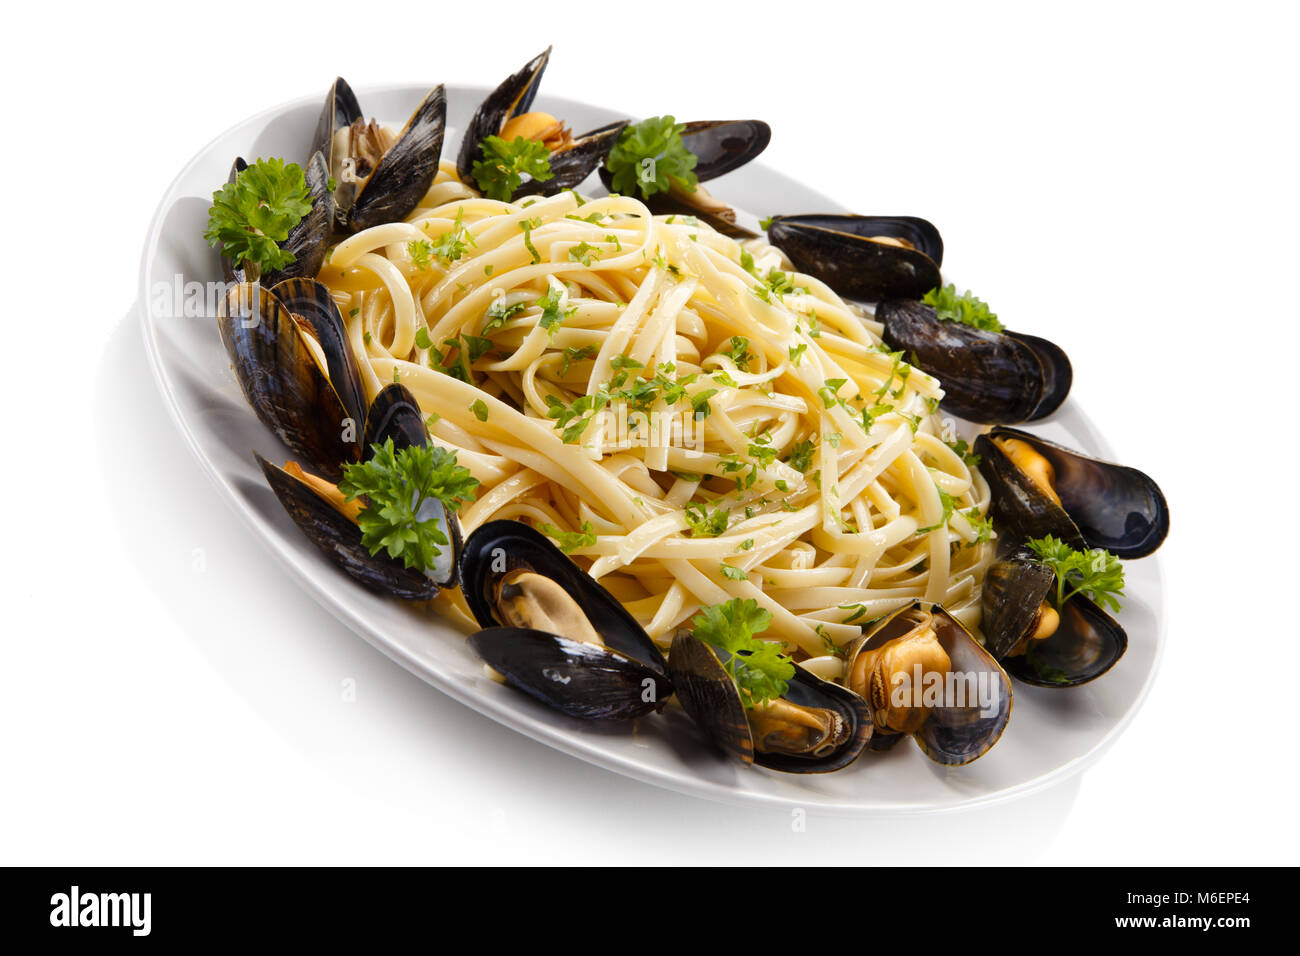 Cooked mussels and pasta on white background Stock Photo